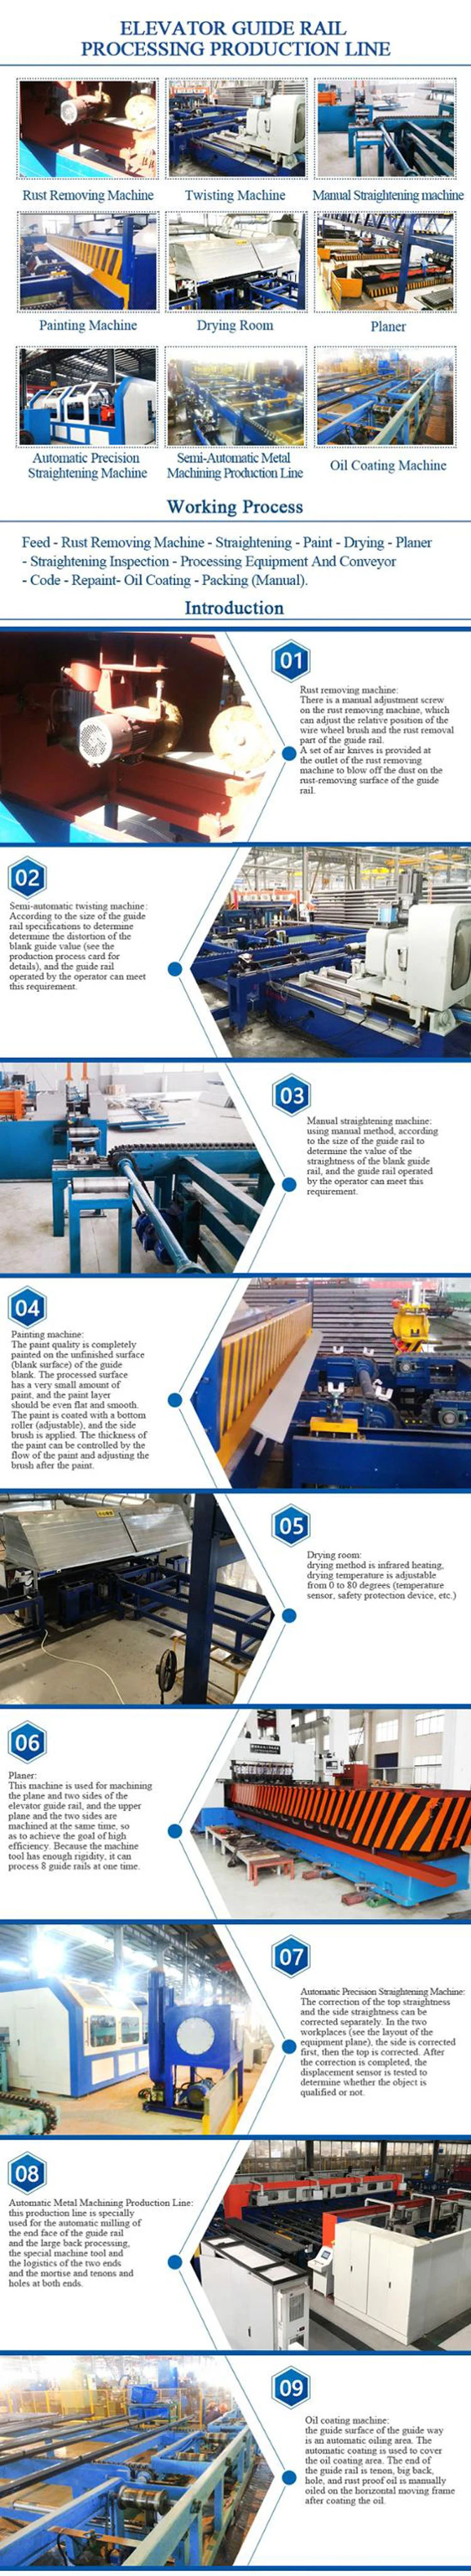 Automatic T127-1b Elevator Guide Rail Making Machine Line with PLC Control System